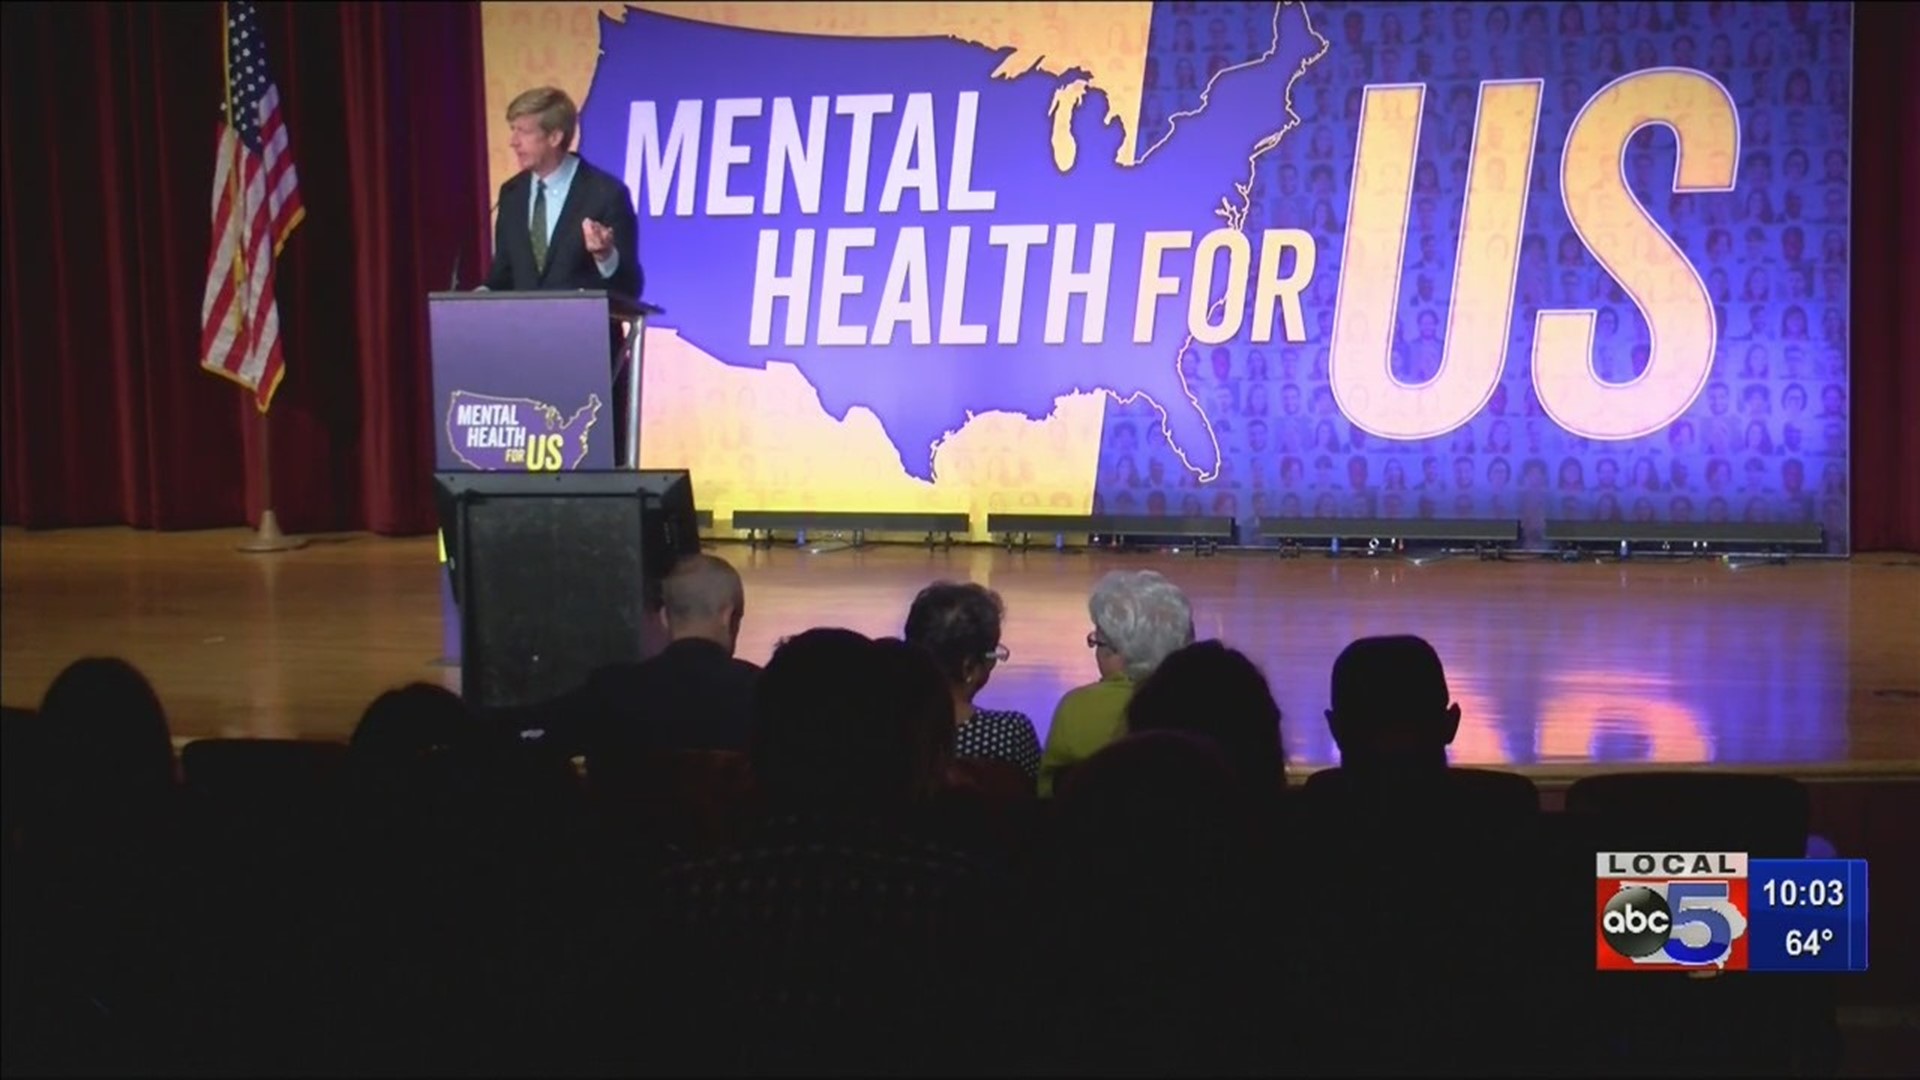 Mental Health for Us Presidential Candidate Forum at Drake